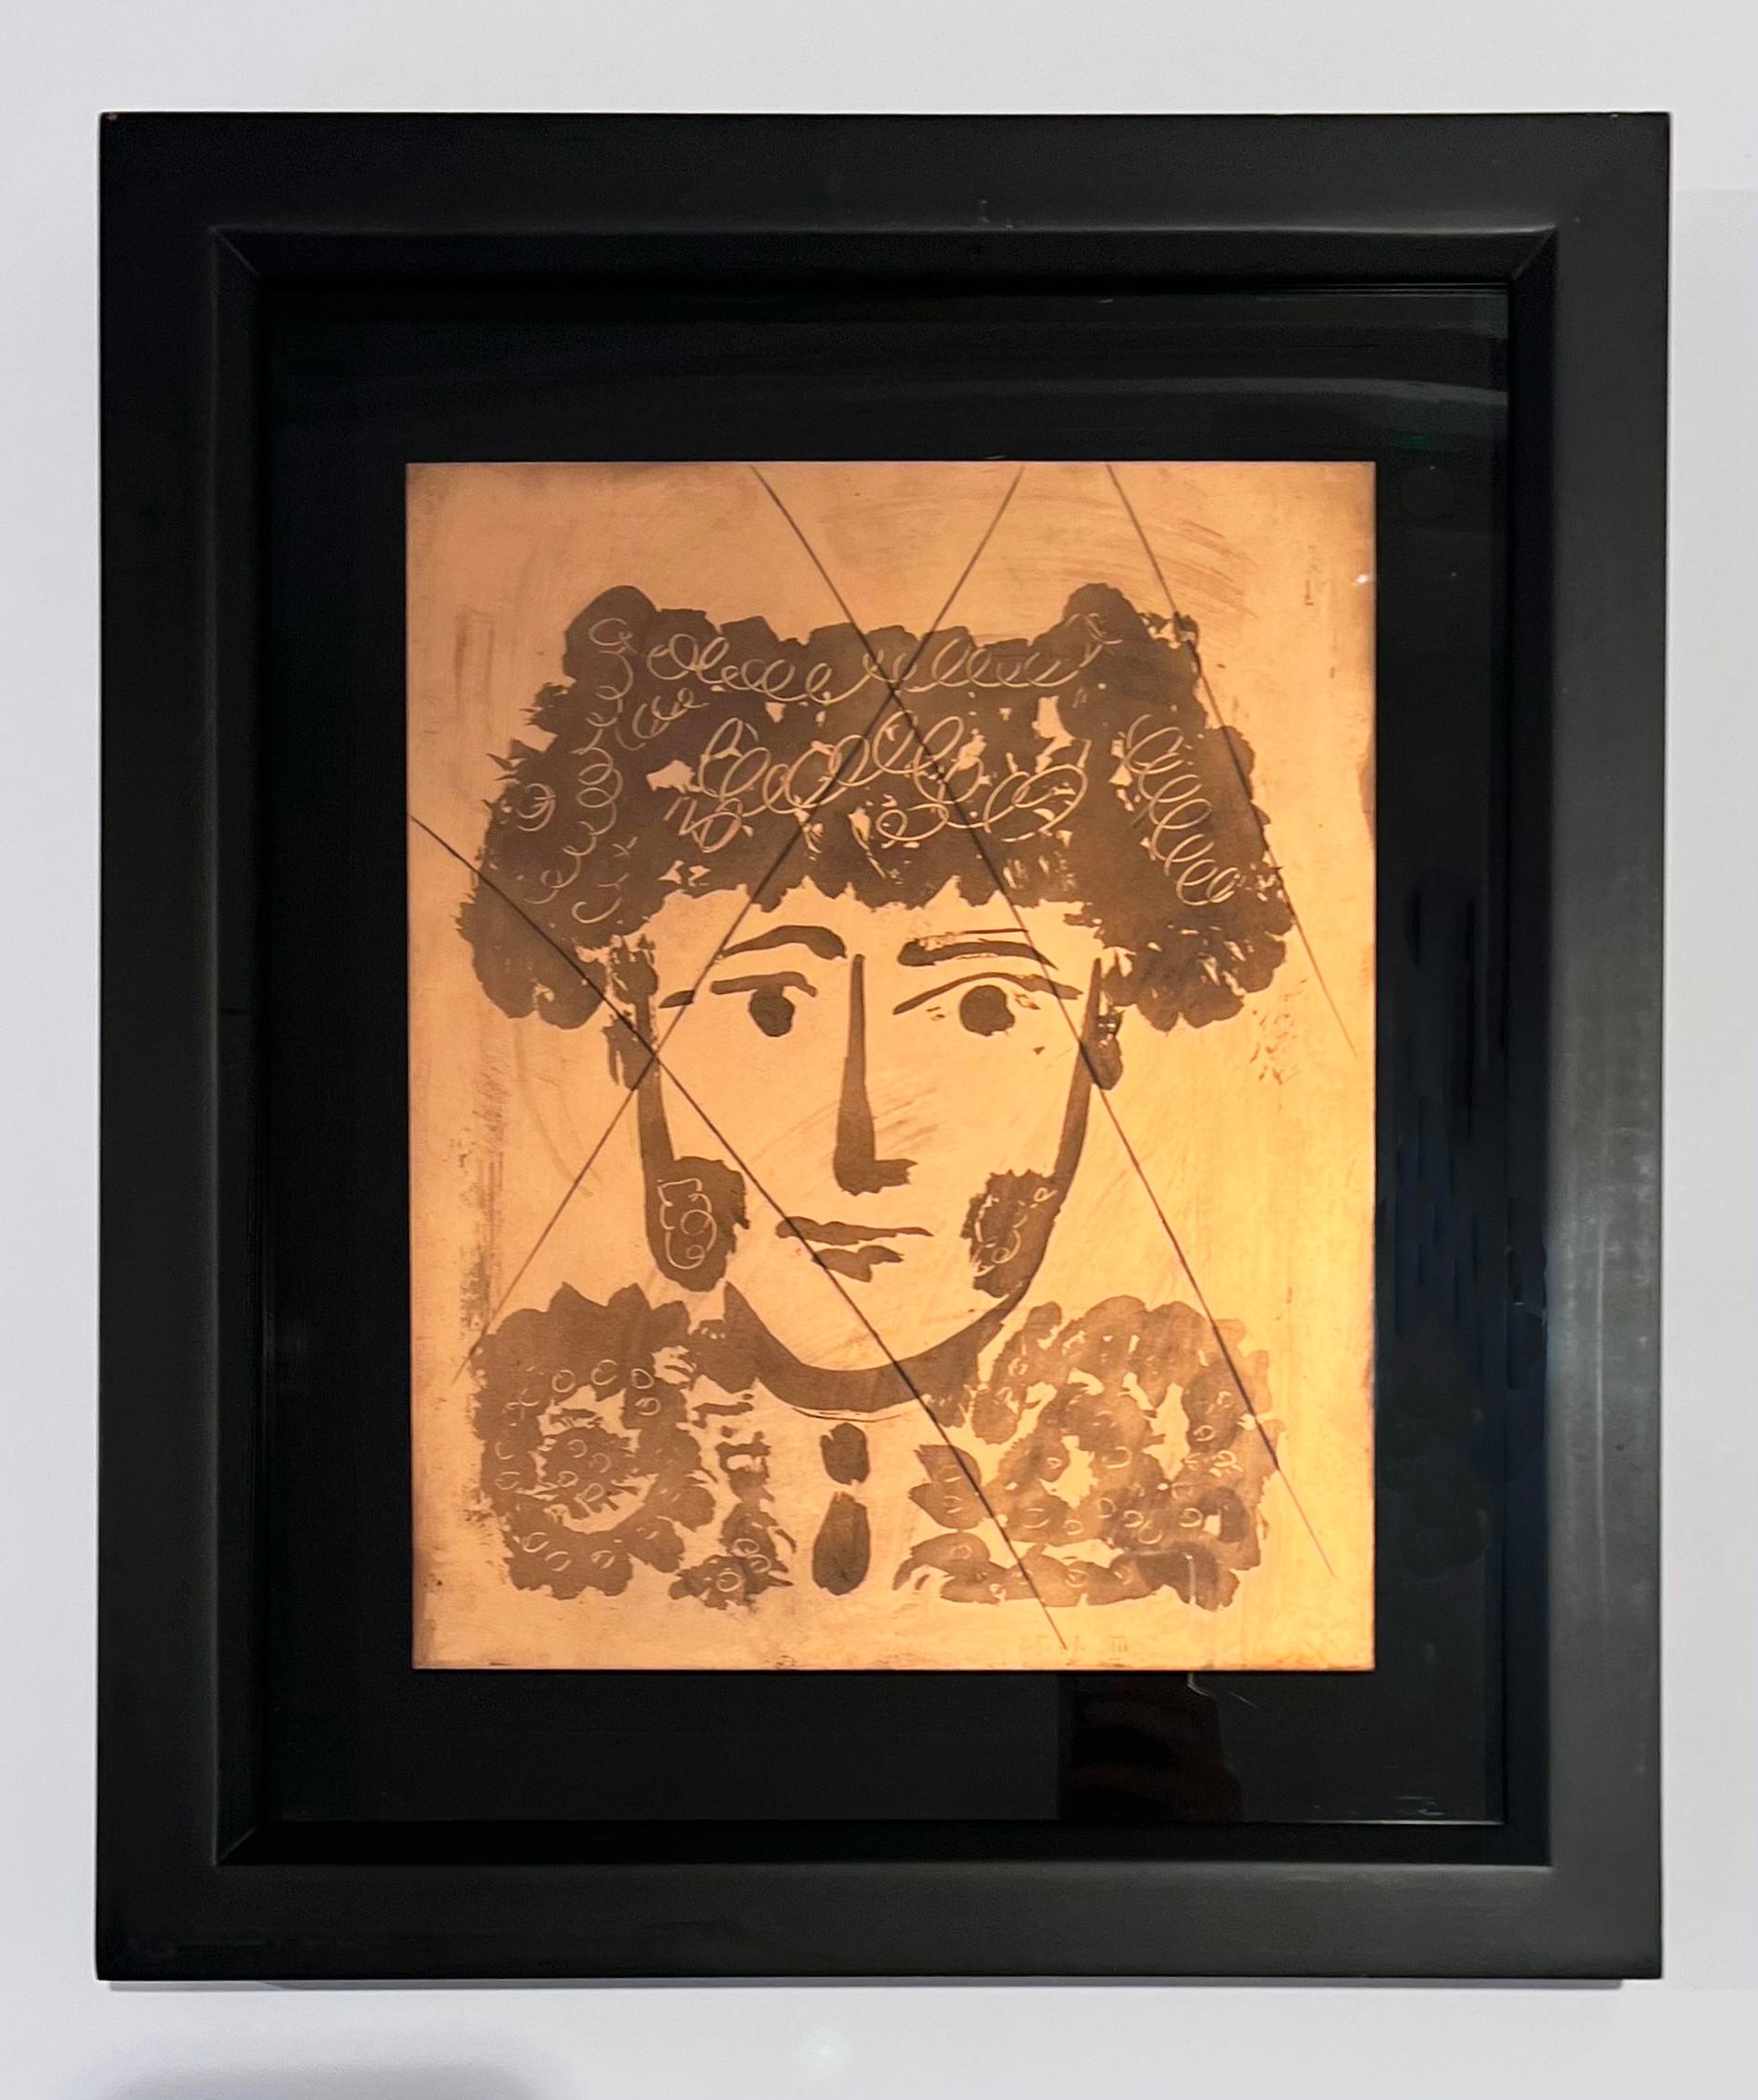 Bullfighter (Torero), copper aquatint plate from 1949 Carmen - Print by Pablo Picasso